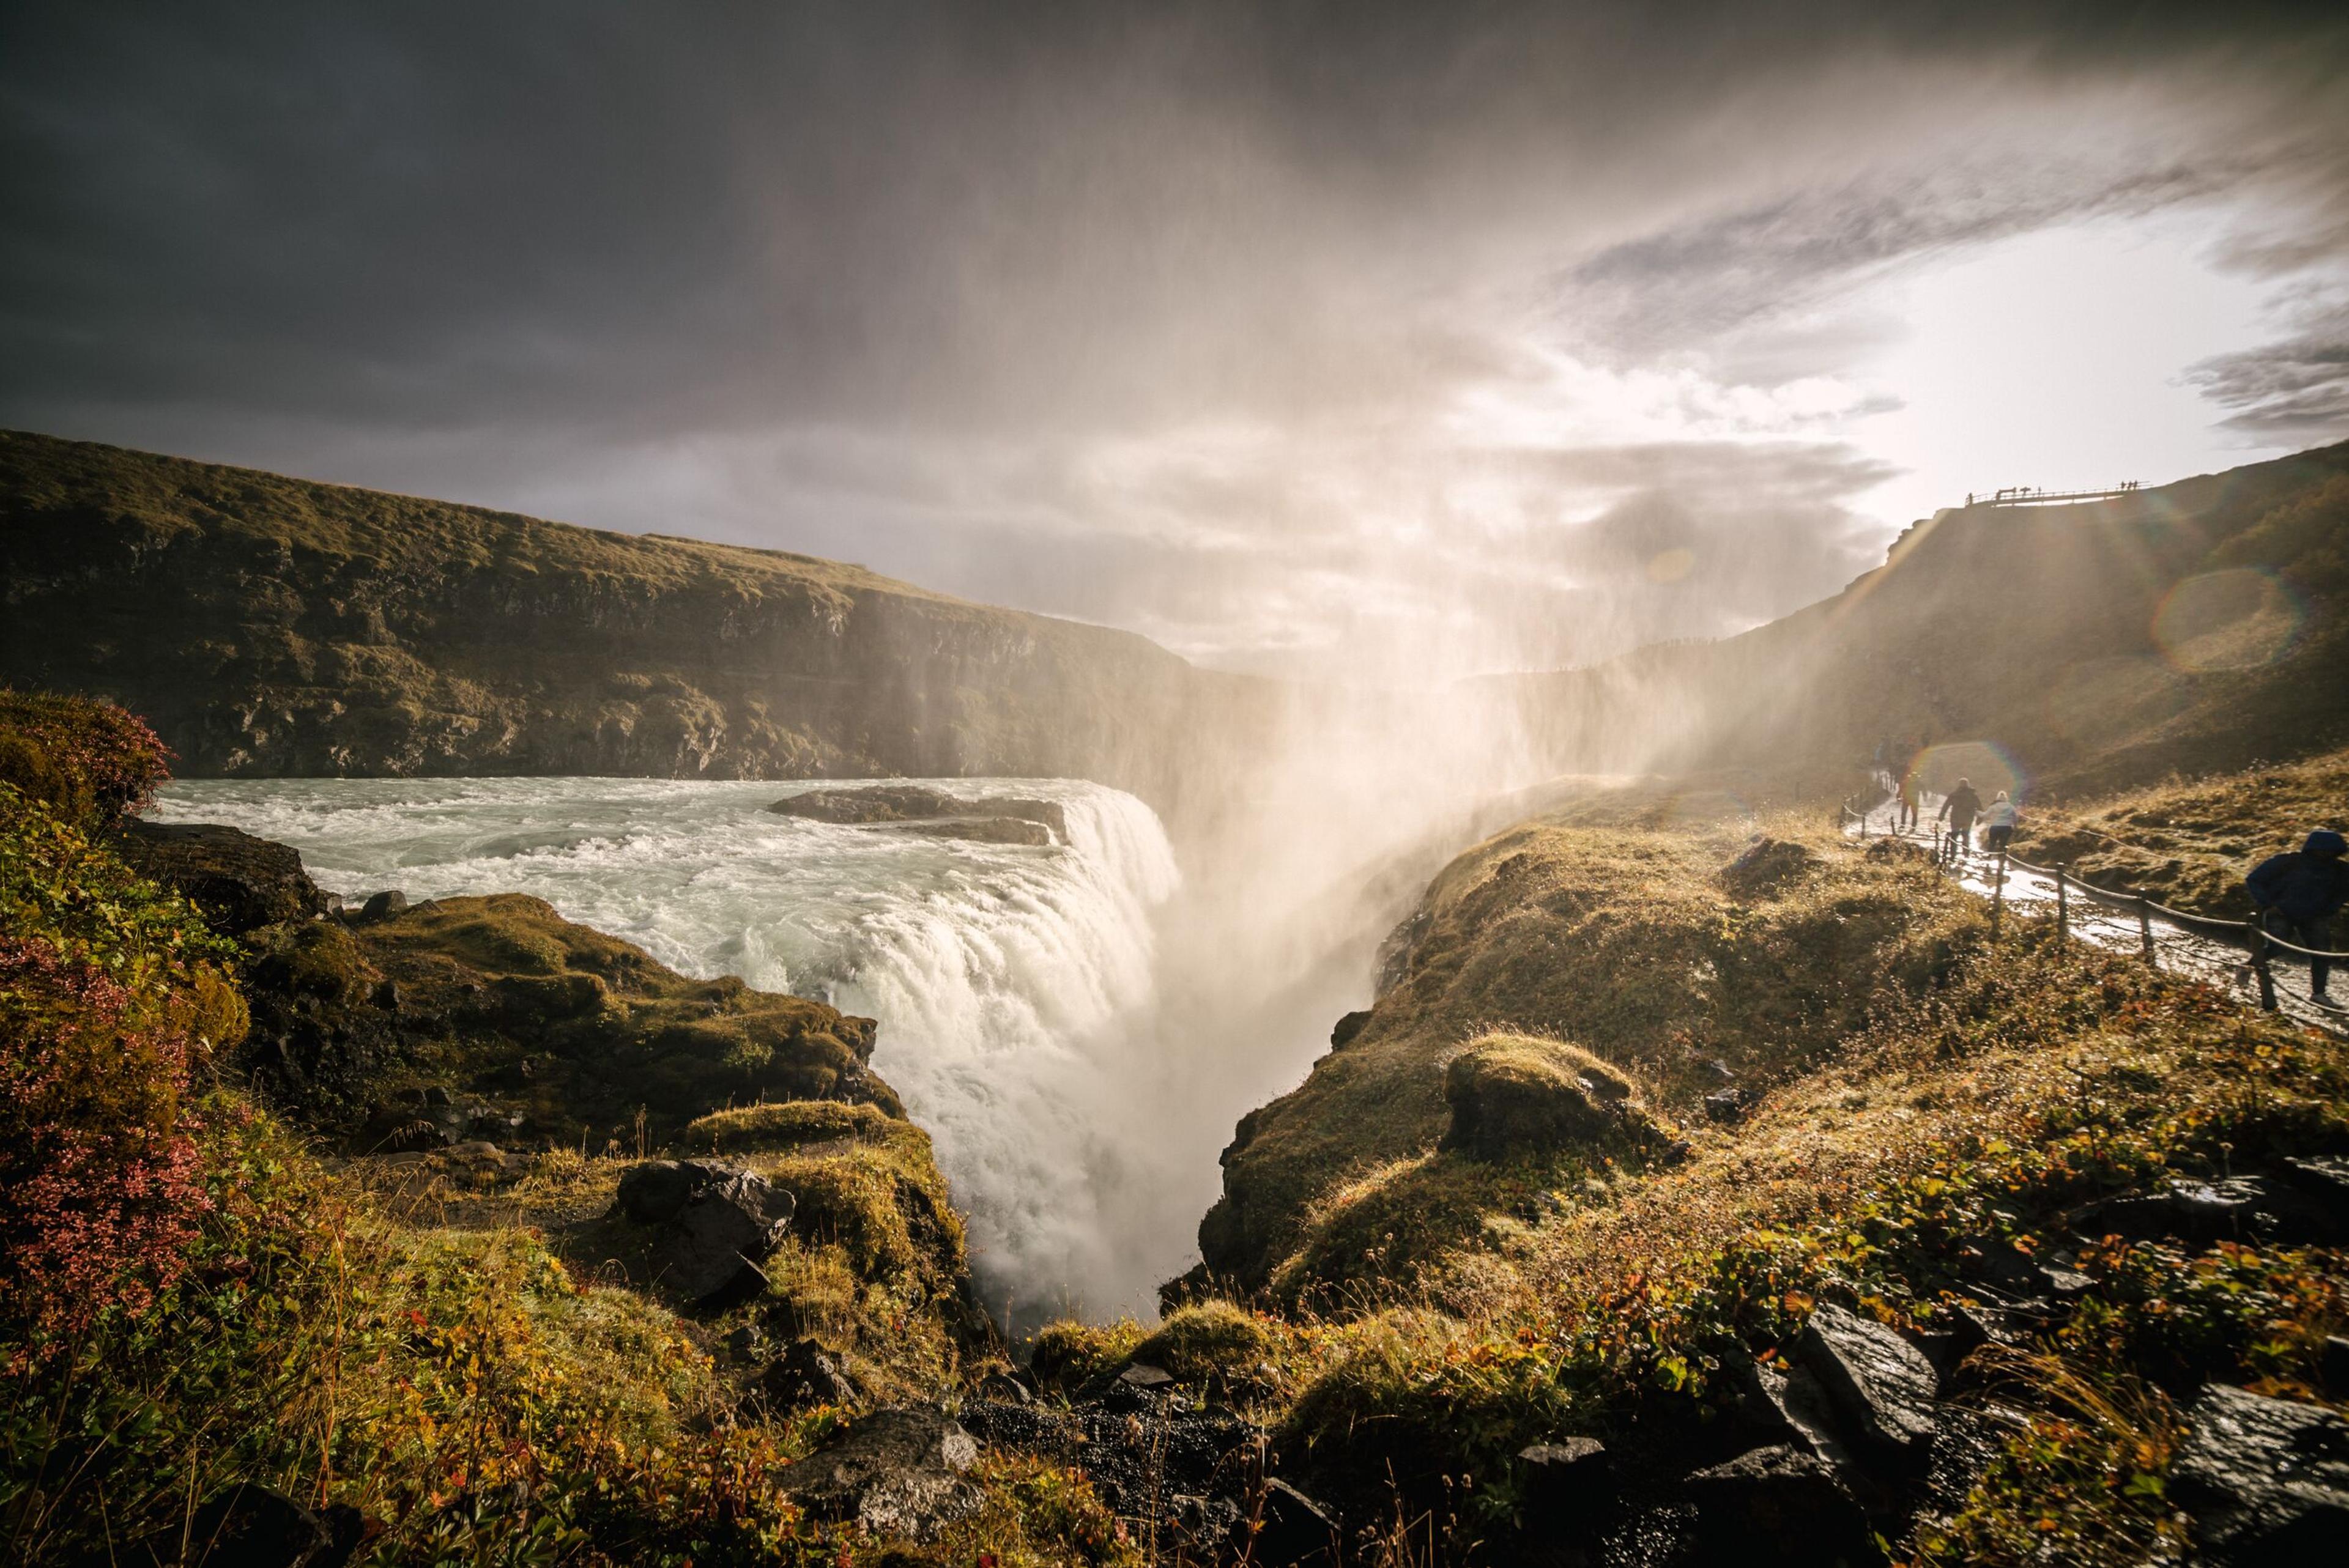  A breathtaking view of Gullfoss, a famous waterfall in Iceland. The powerful, cascading water flows in two tiers down a rugged canyon, surrounded by lush greenery. Mist rises from the falls, creating a soft, ethereal haze.